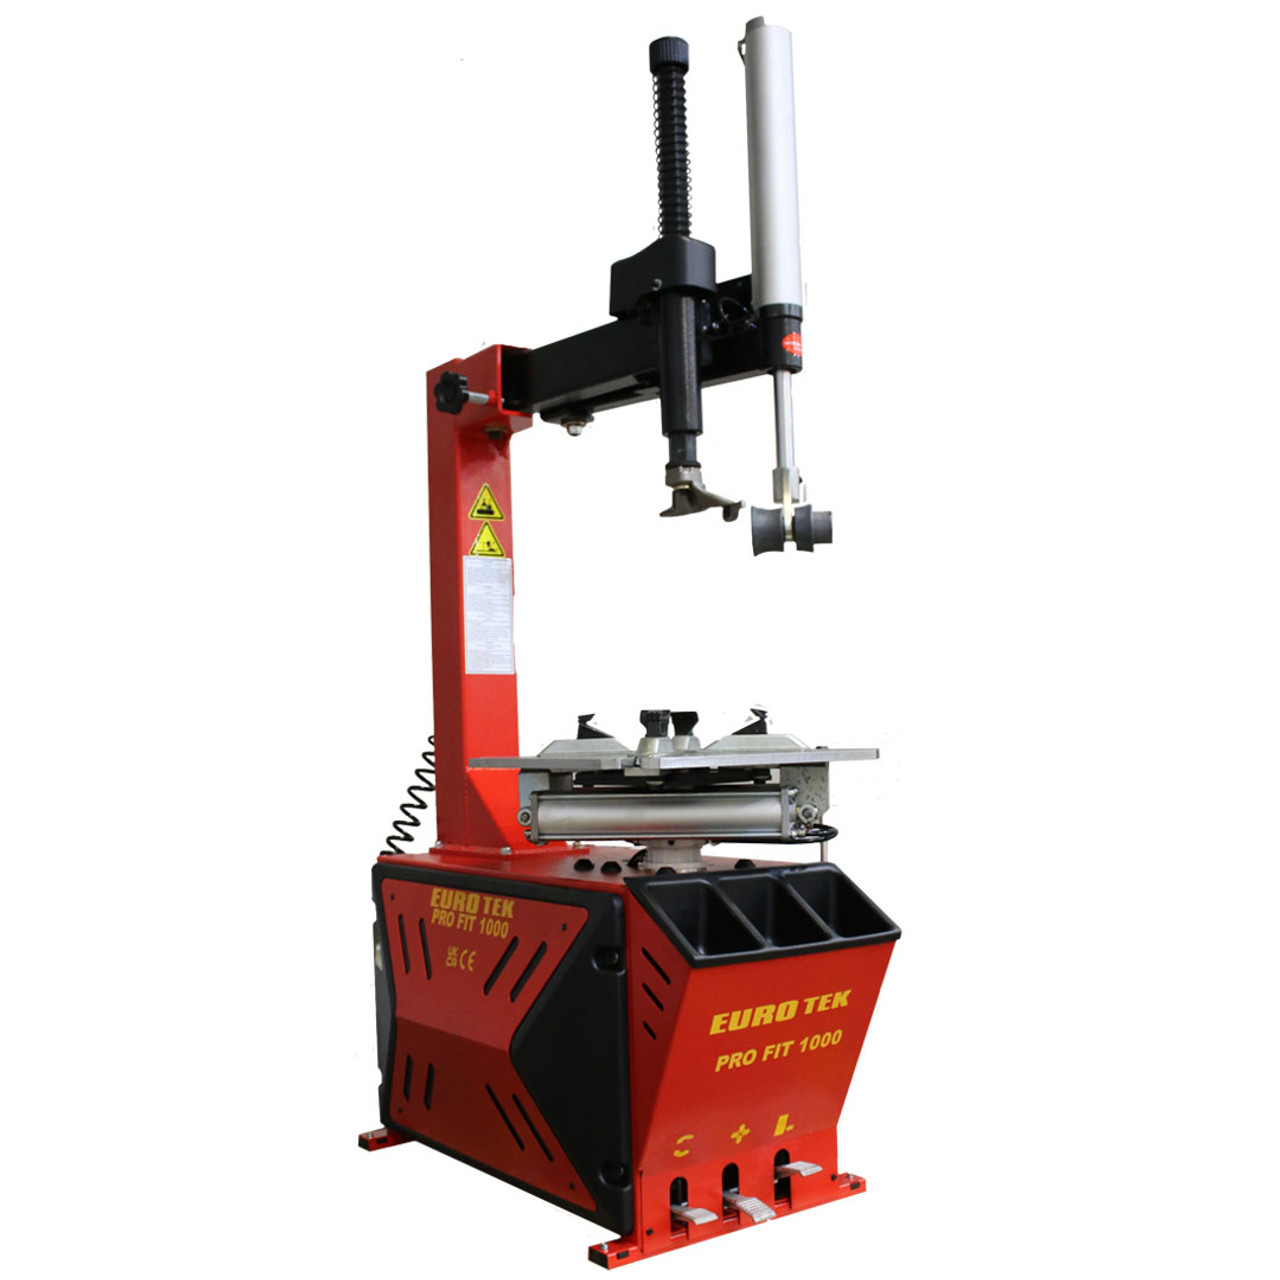 Pro Fit 1000 Semi Automatic Tyre Changer